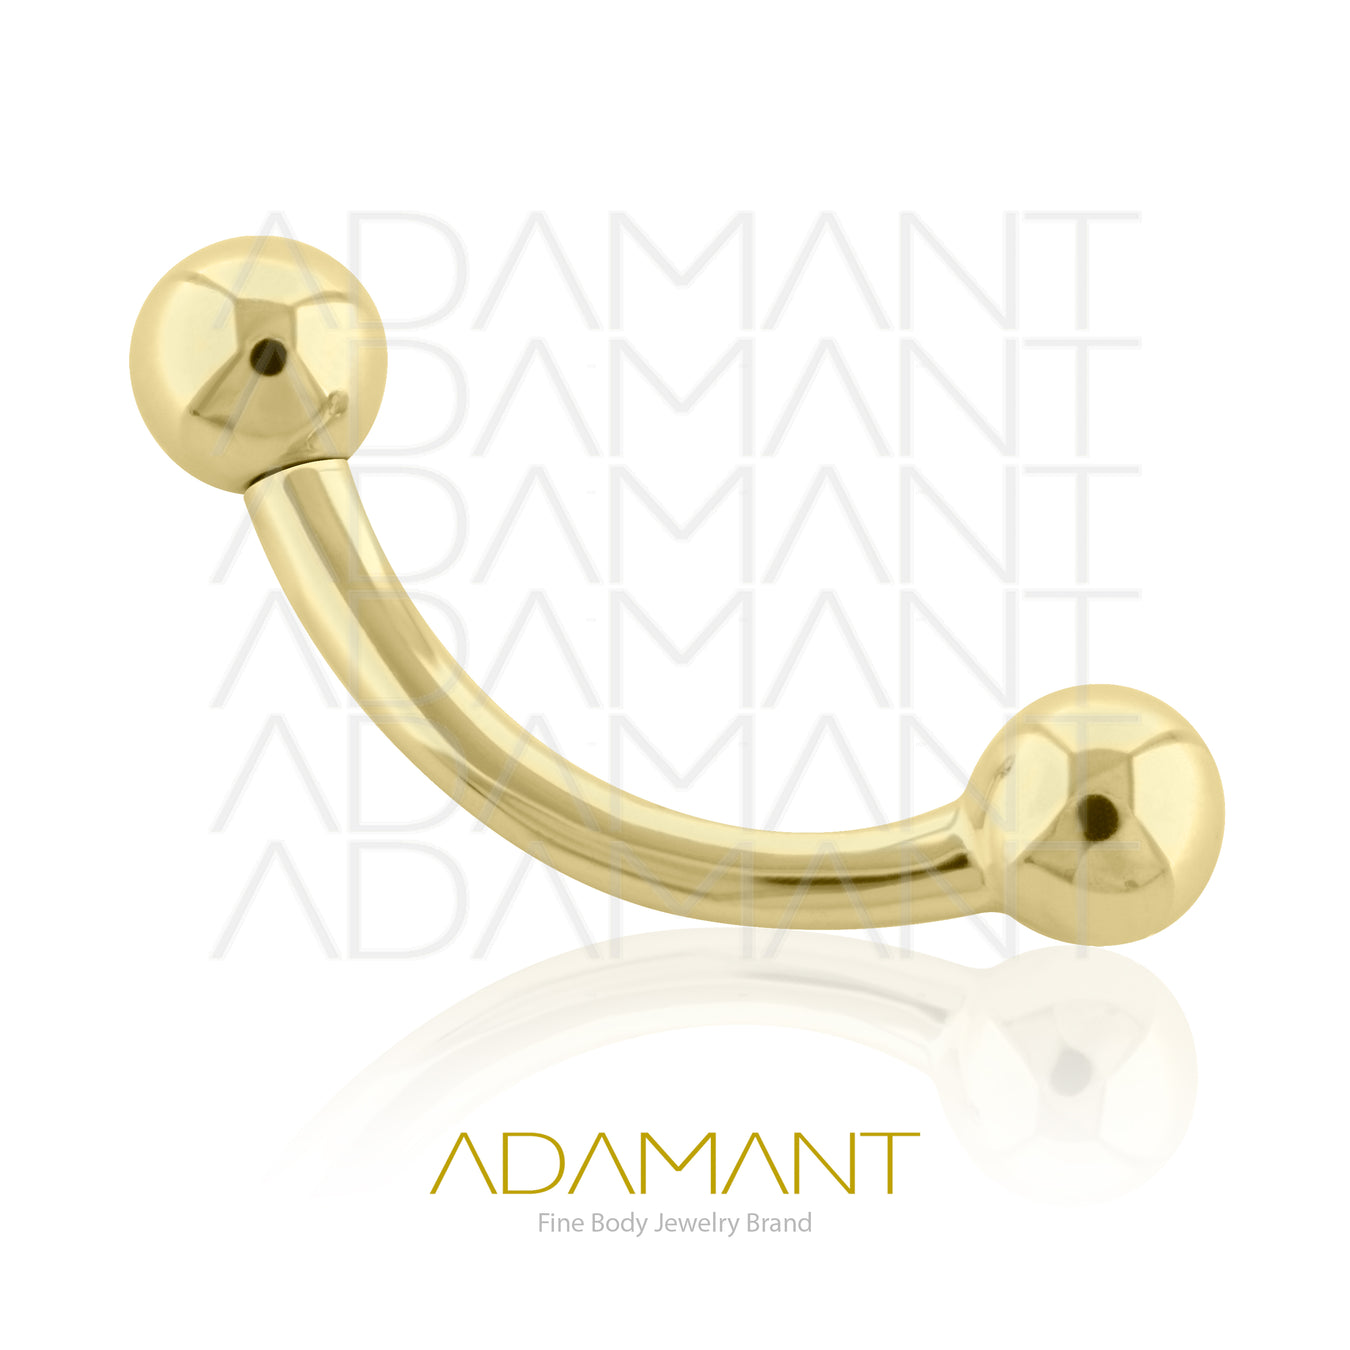 14K Gold Curved Barbell